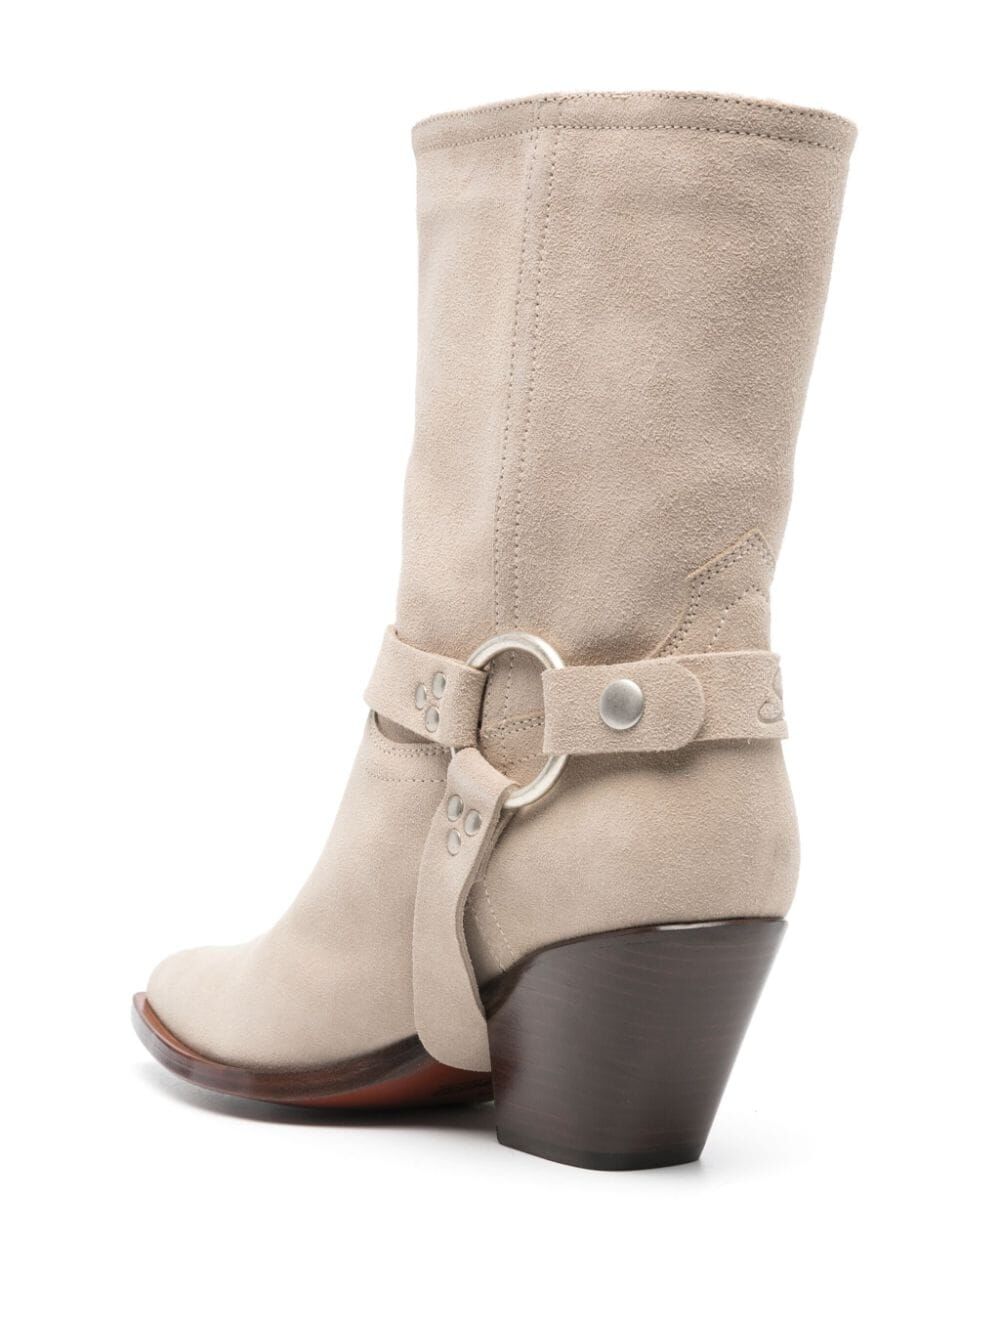 Atoka 70mm suede boots